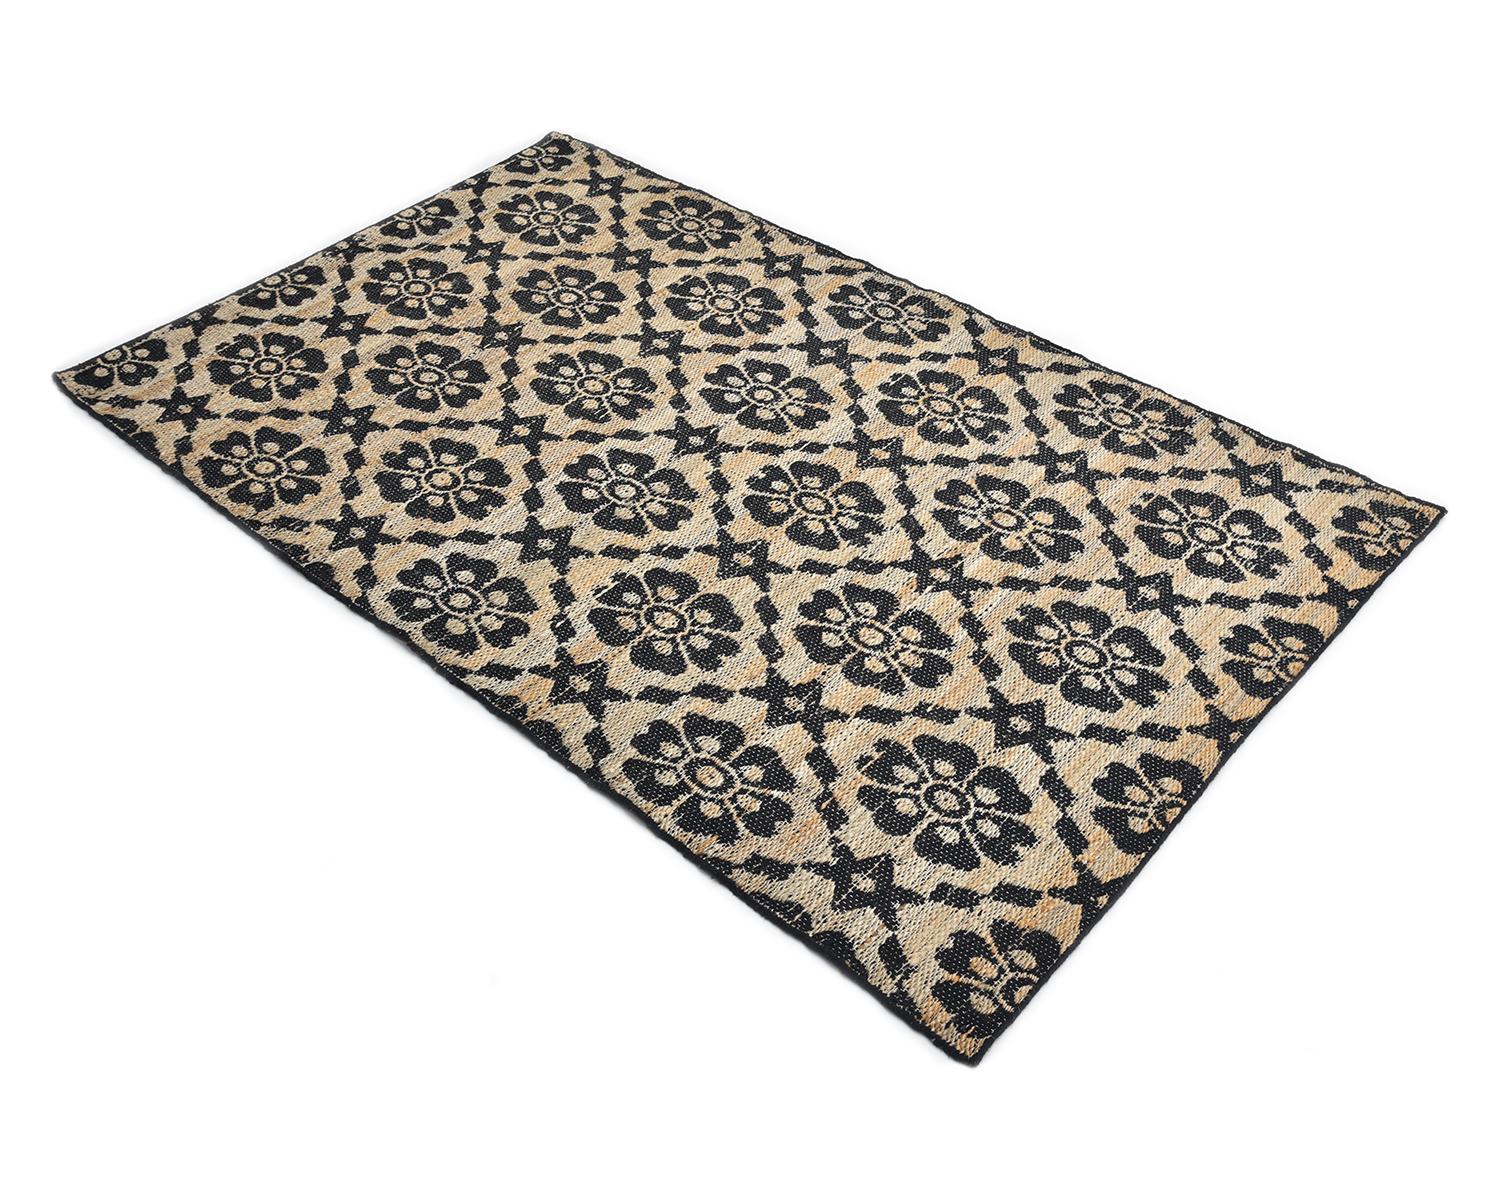 Solo Rugs Transitional Jute Trellis Hand Woven Brown Area Rug For Sale 1